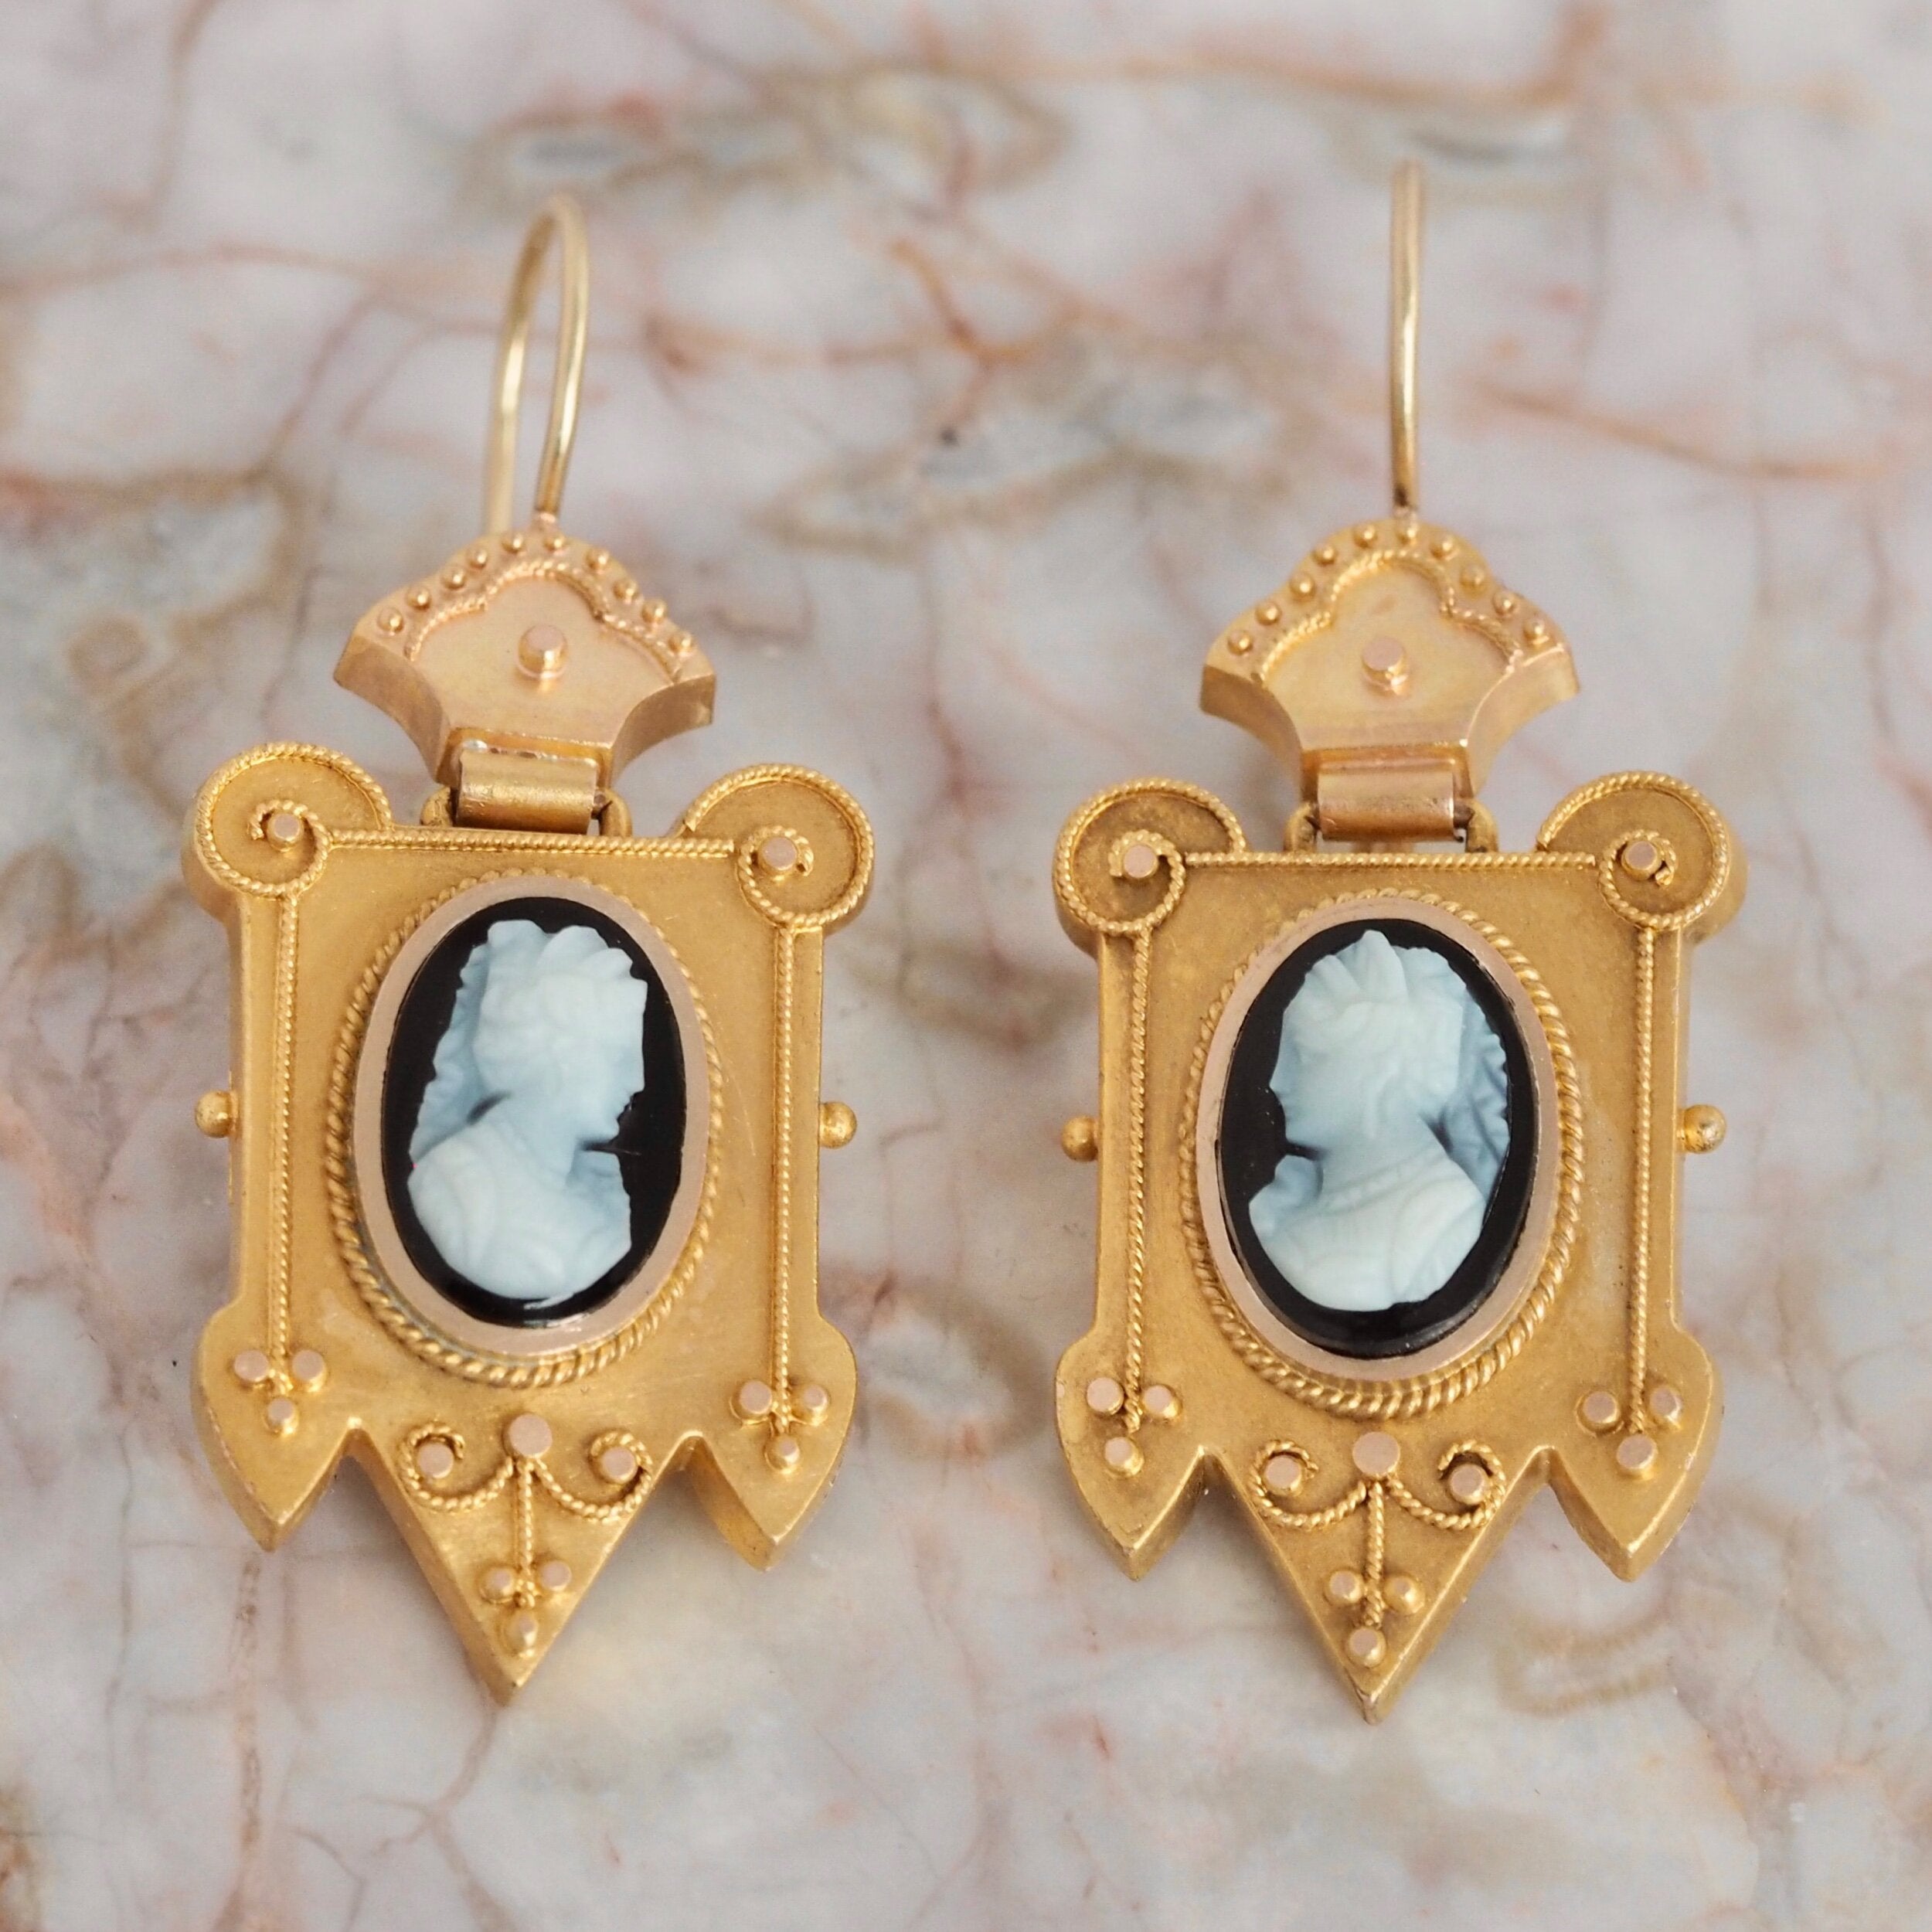 How to Value and Date Your Vintage Cameo - Jonathan's Diamond Buyer